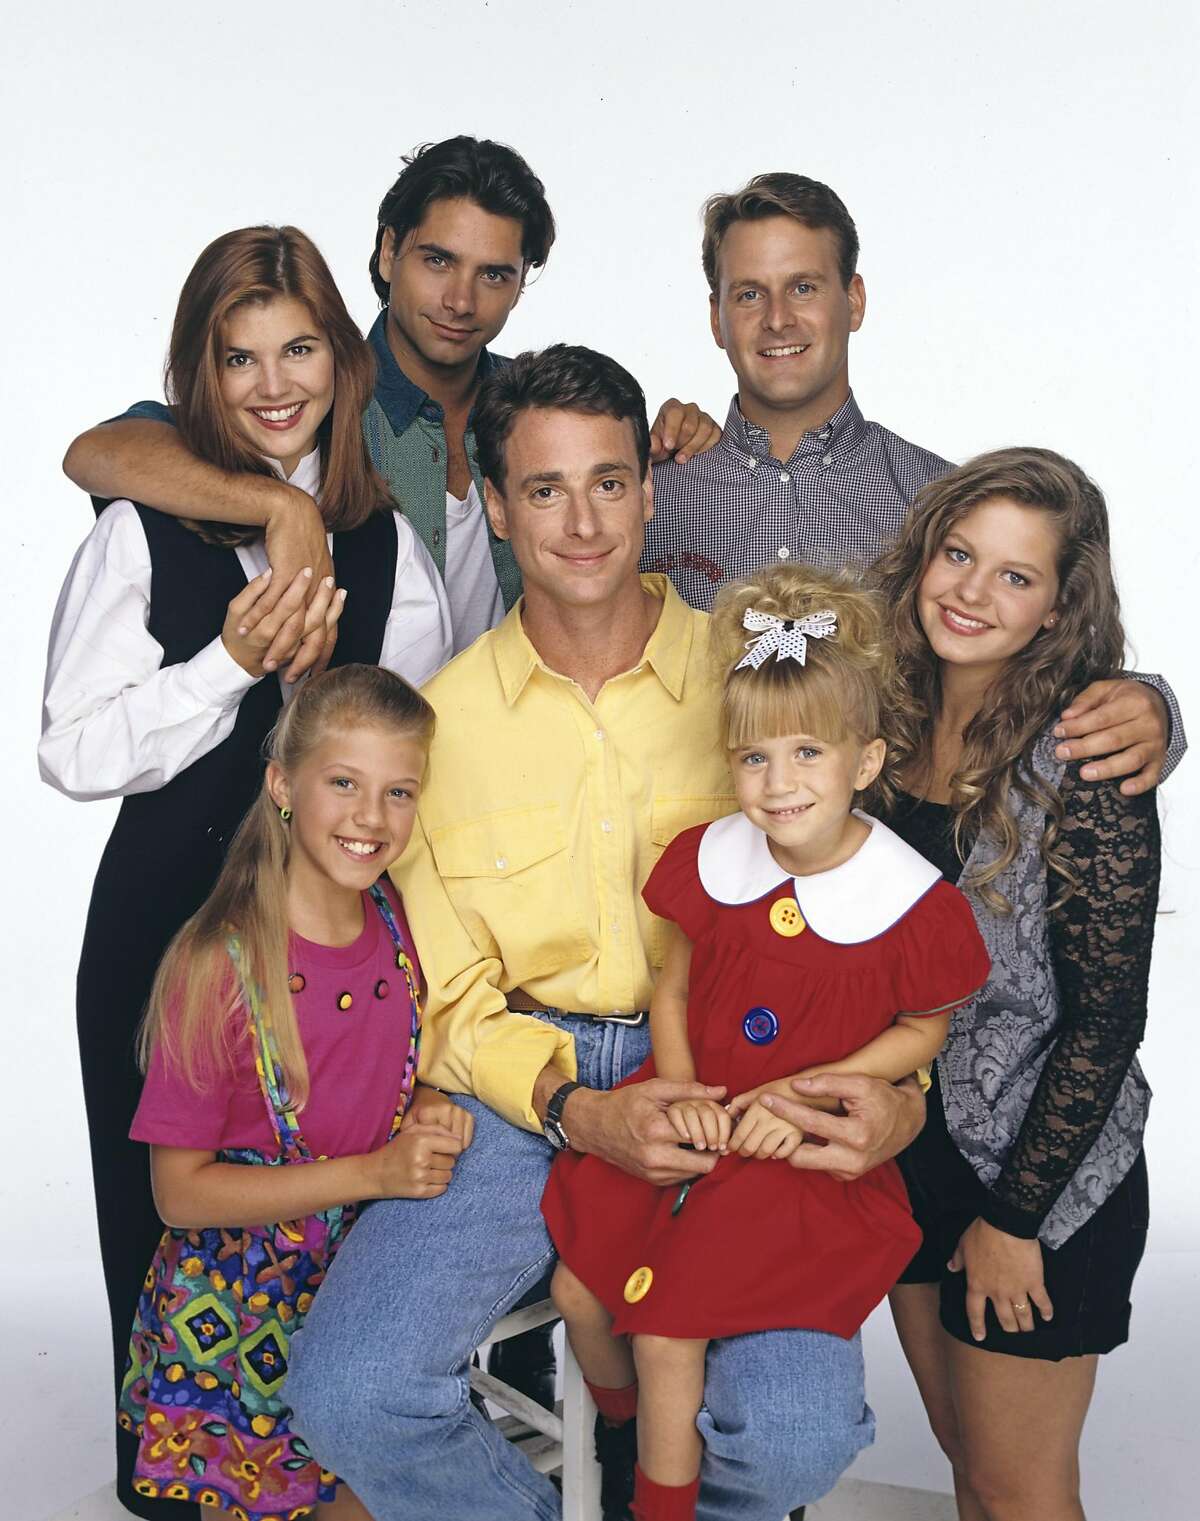 UNITED STATES - SEPTEMBER 14: FULL HOUSE - Season Seven - Gallery - 9/14/93, Pictured, back row: Lori Loughlin (Rebecca), John Stamos (Jesse), Dave Coulier (Joey); bottom row: Jodie Sweetin (Stephanie), Bob Saget (Danny), Mary Kate Olsen (Michelle), Candace Cameron (D.J.), (Photo by Bob D'Amico/ABC via Getty Images)